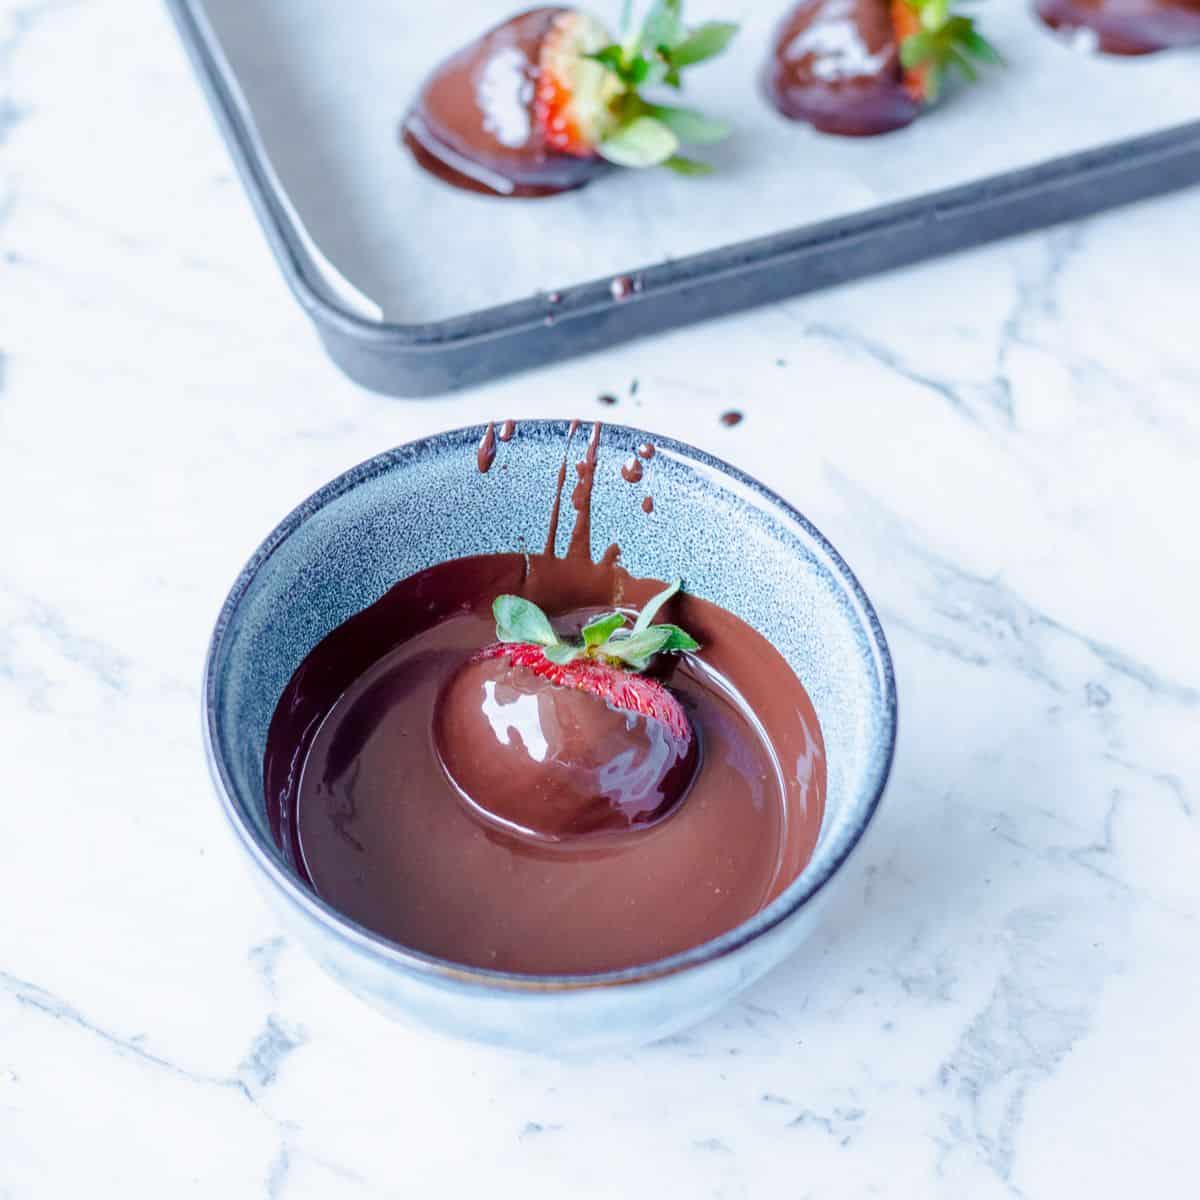 A strawberry dipped in melted chocolate.